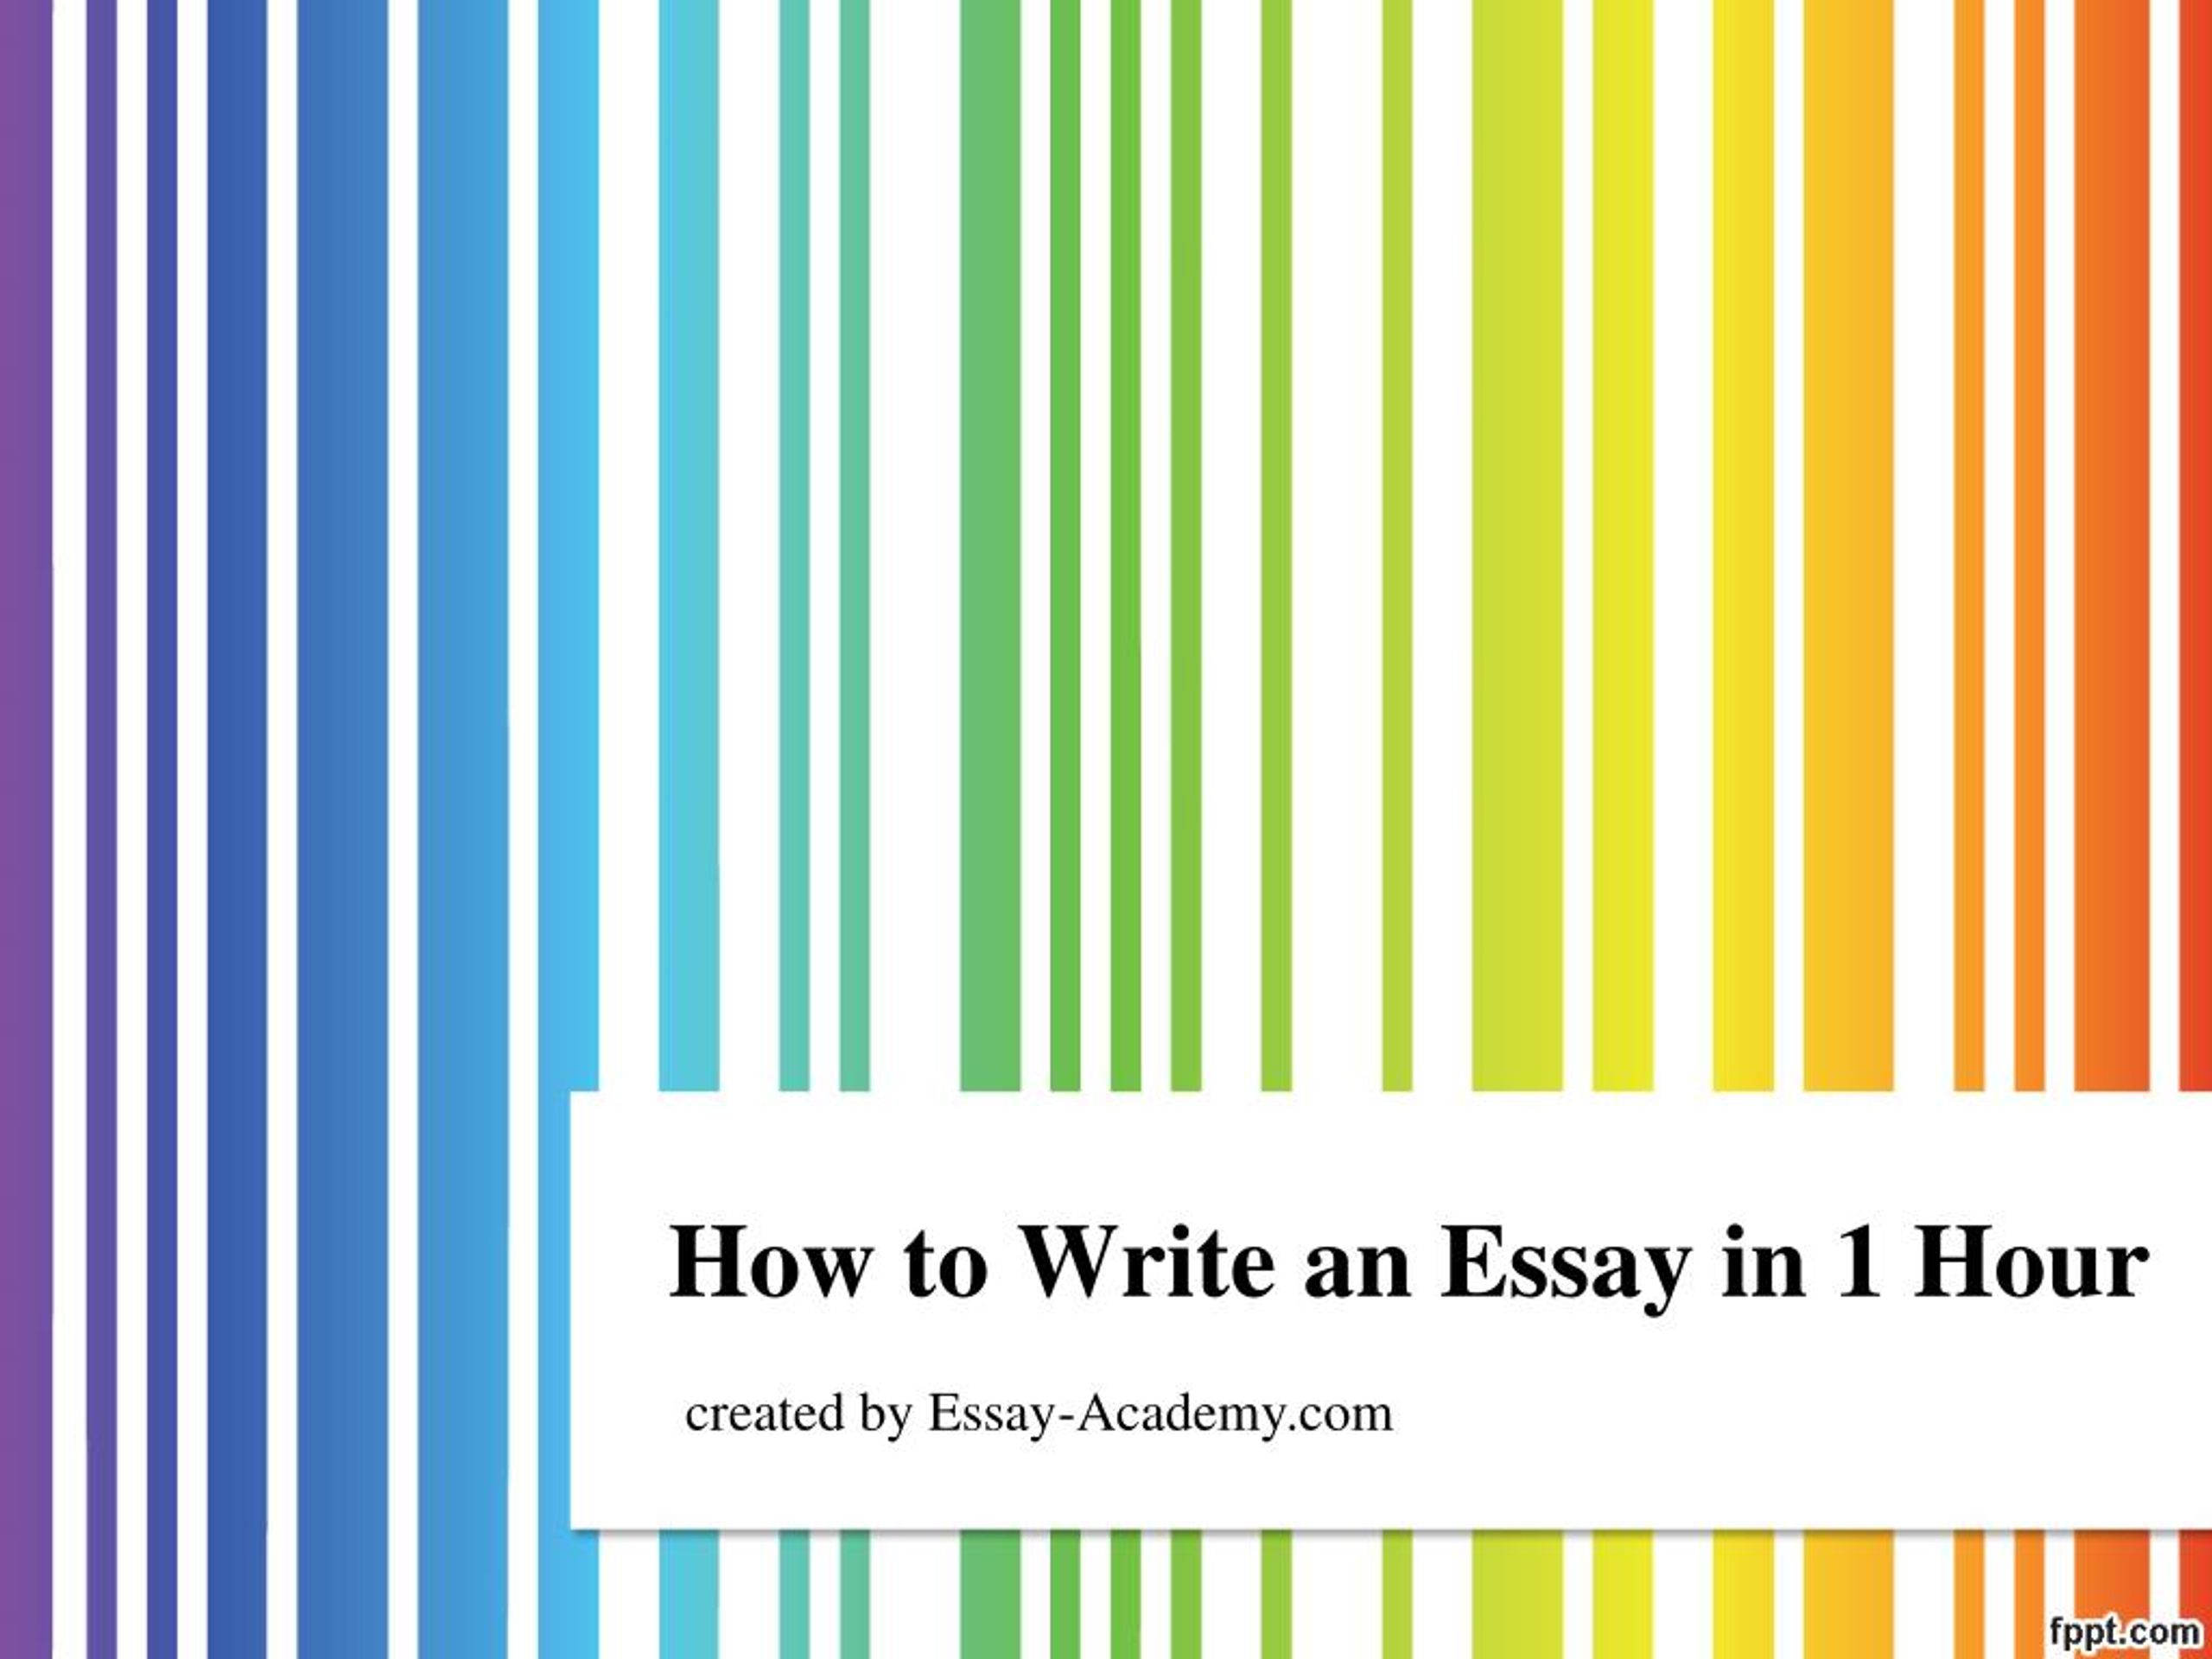 how to write an essay in 1 hour